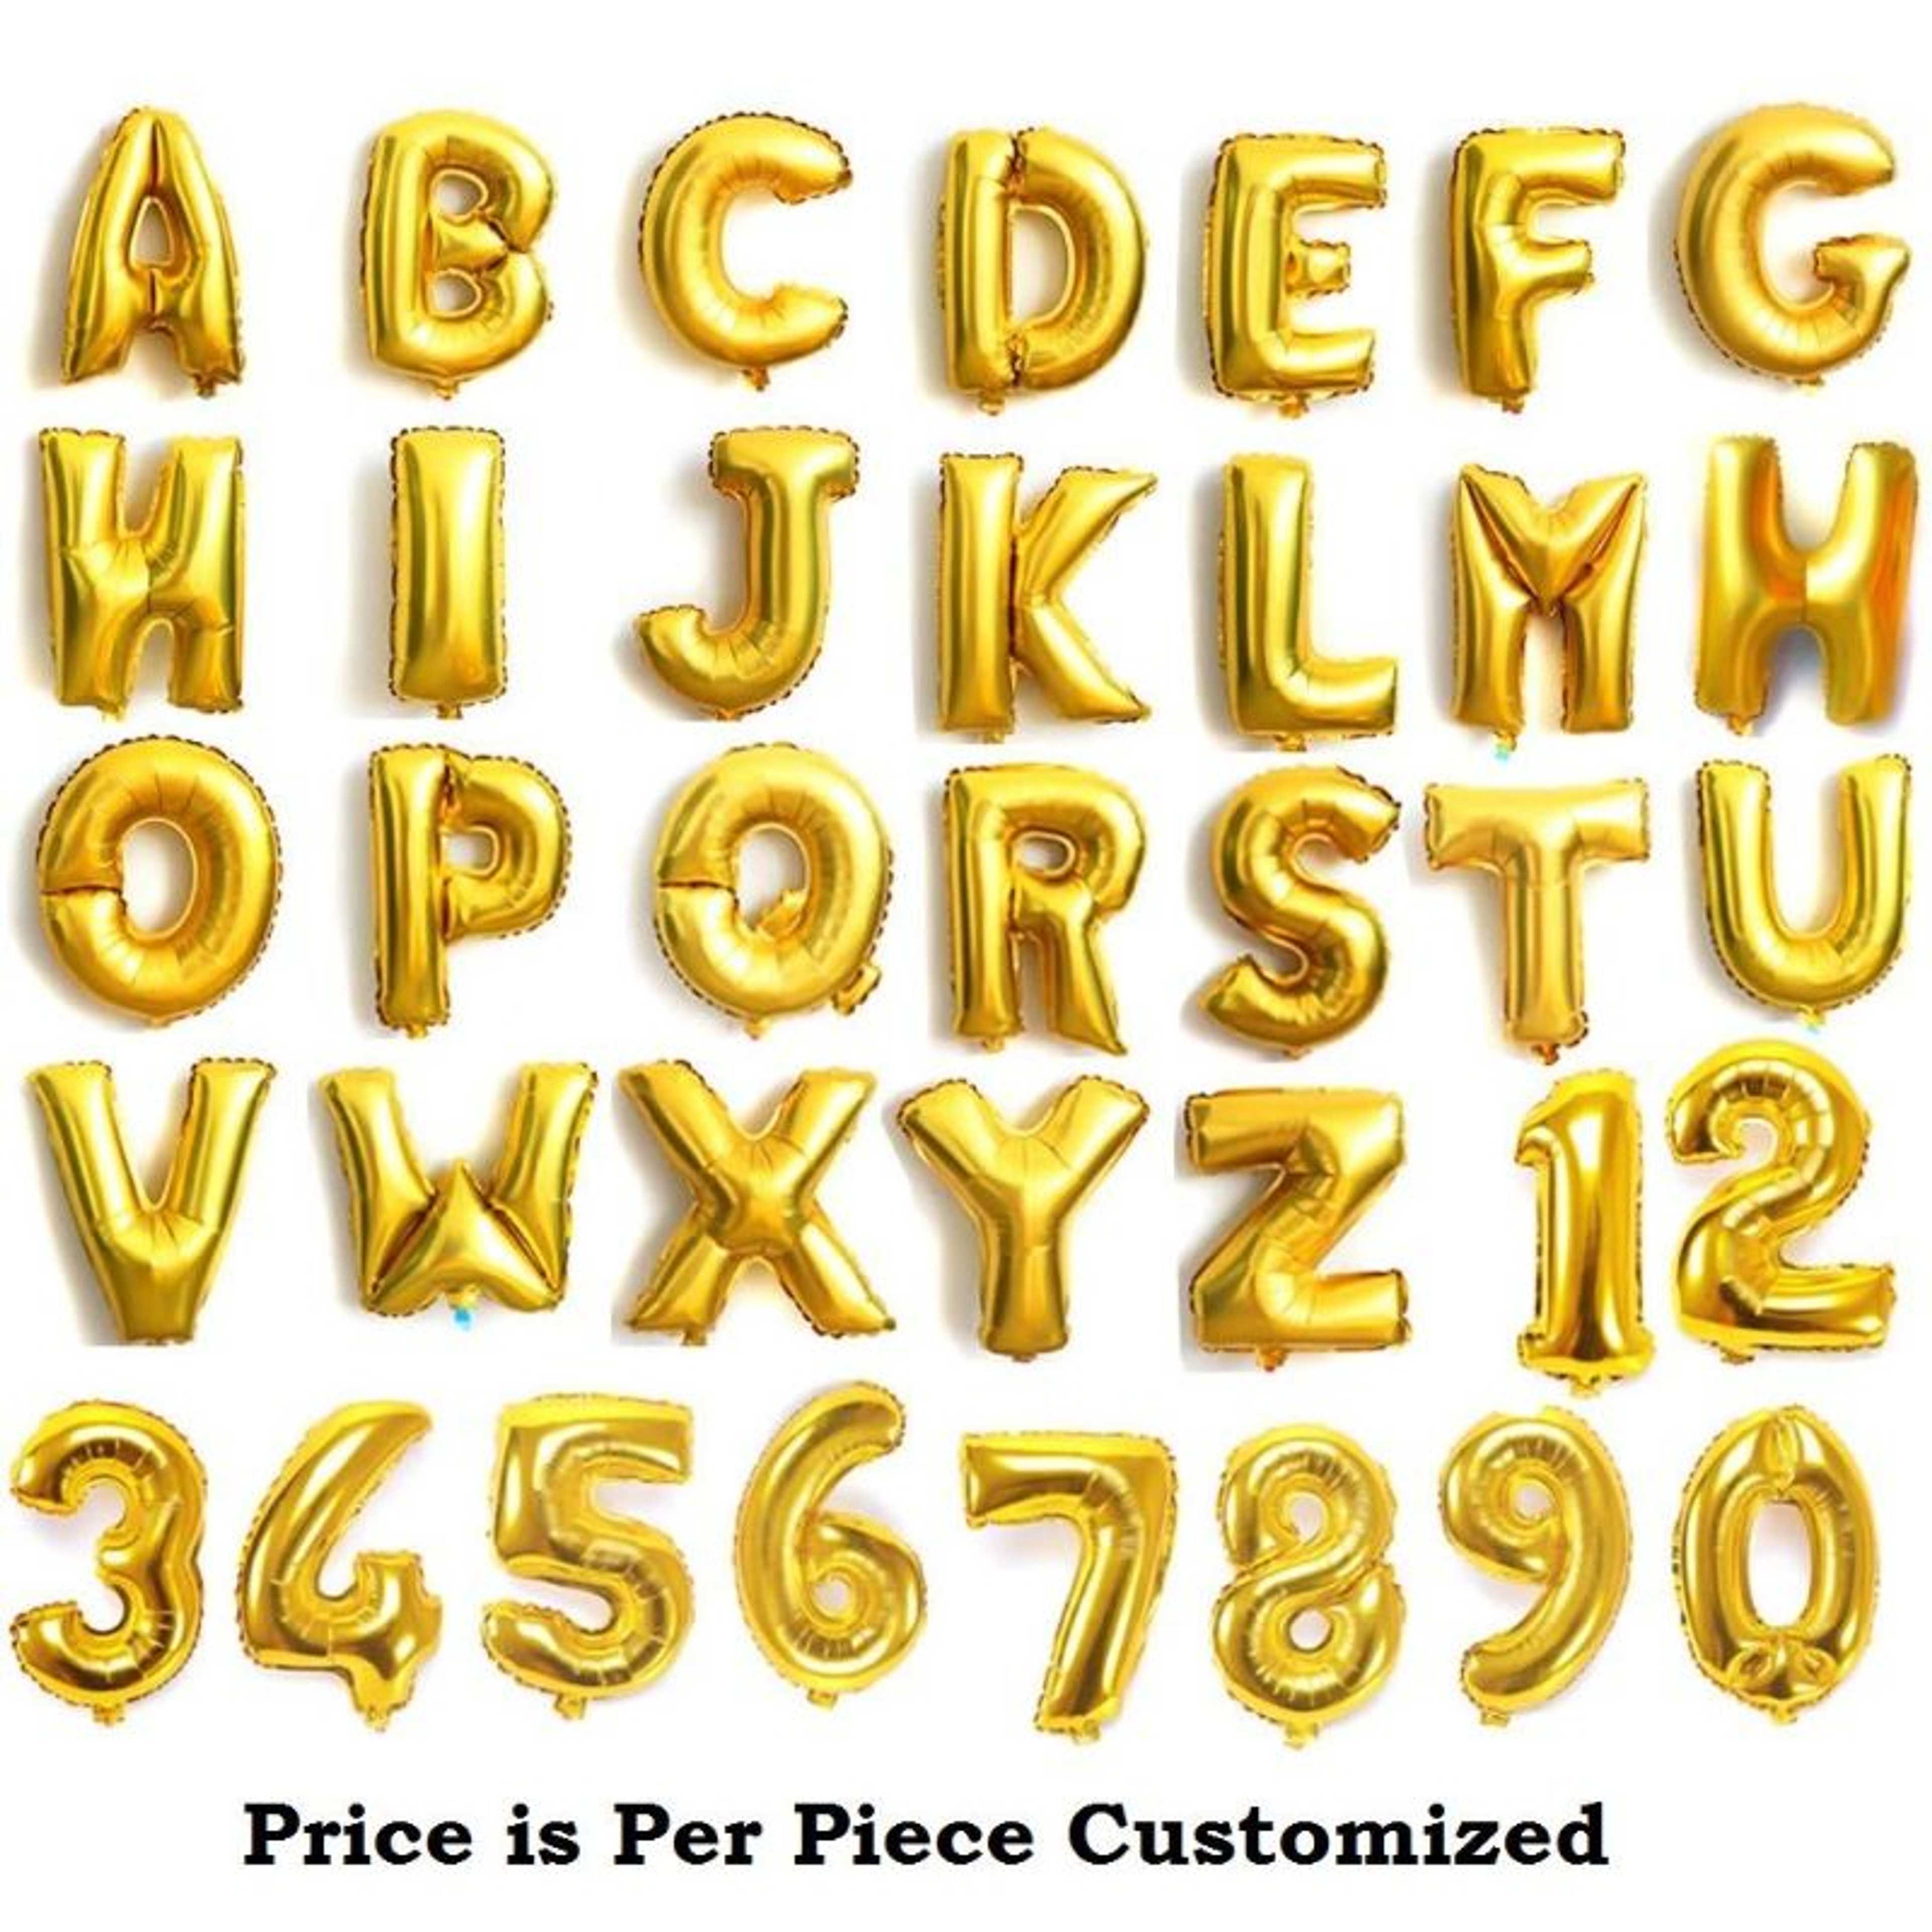 Golden Foil Balloons All Alphabets And Numbers Customized For Birthday Party Etc 16 Inches A TO Z 0 to 9 Price is Per Piece Included Pipe To Inflate